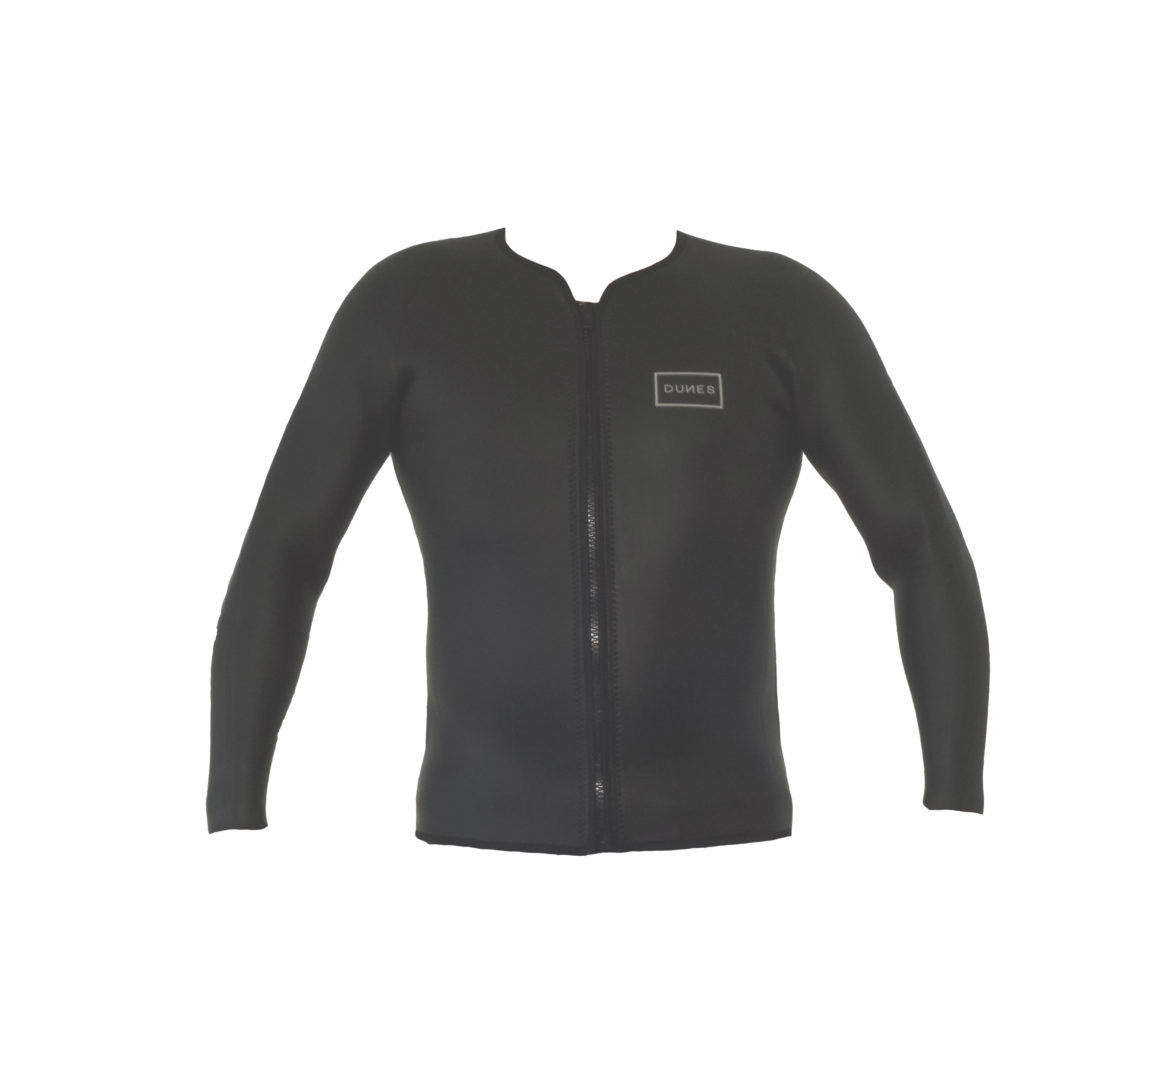 Mens Smoothy wetsuit vest